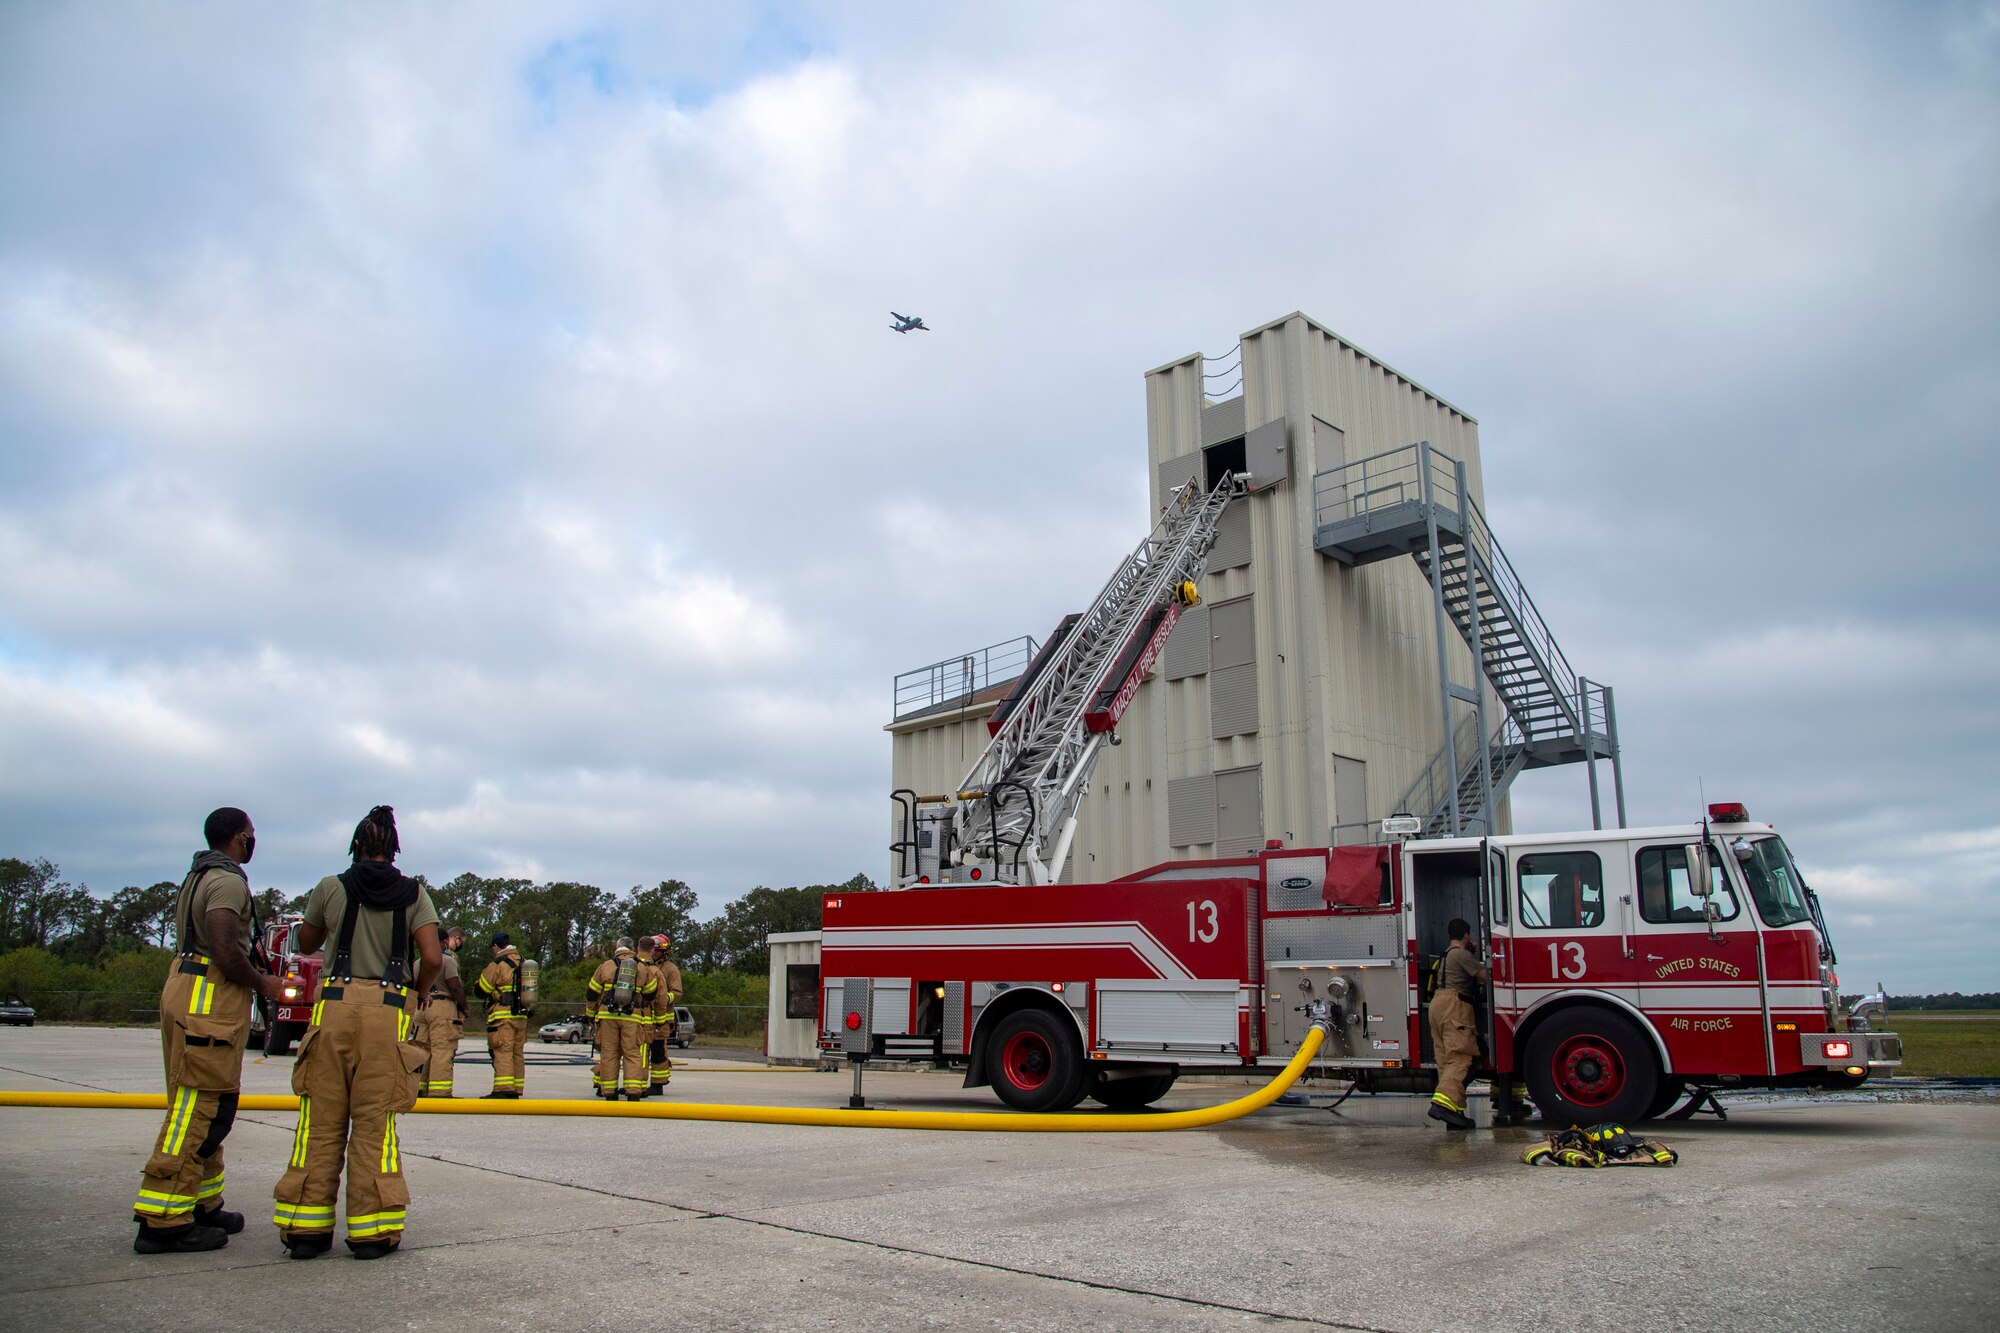 6th Civil Engineer Squadron (CES) Fire and Emergency Services Airmen don gear for a live-burn exercise at MacDill Air Force Base, Fla, March 23, 2021.